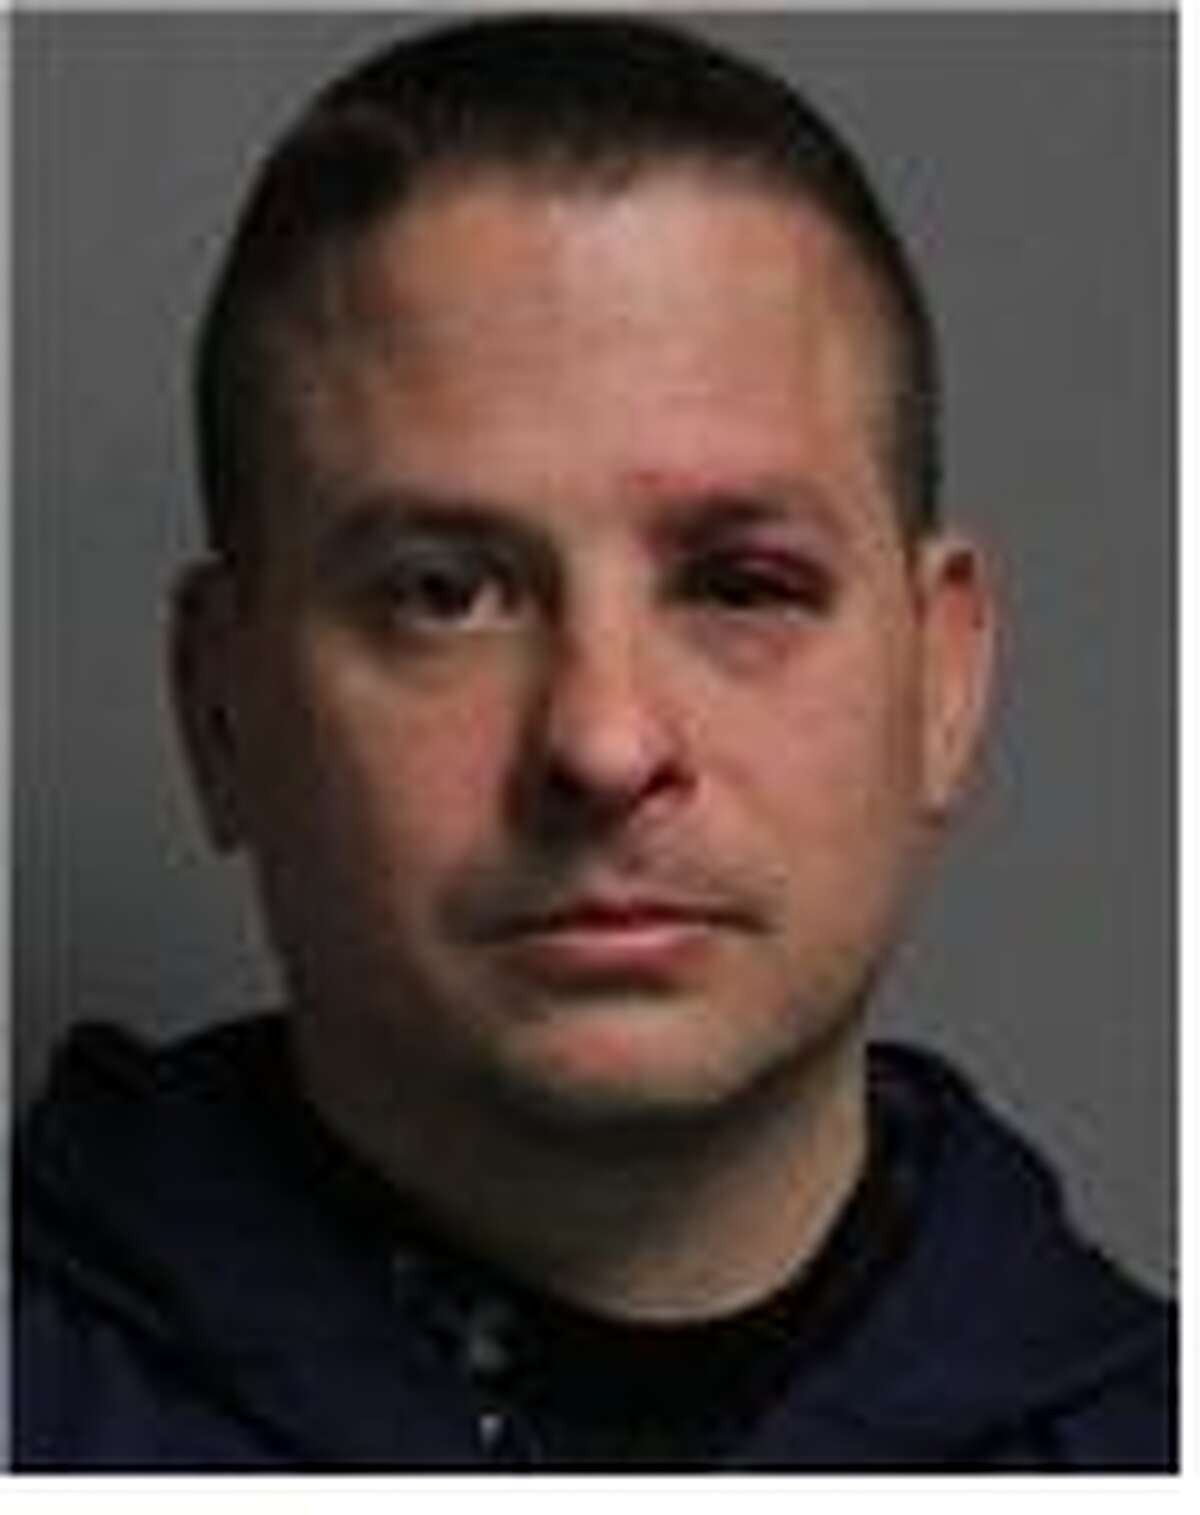 State Police Sgt. Gregory Bennett, 39, was charged with driving while intoxicated after he crashed his SUV on Interstate 90 early Sunday evening, Dec. 16, 2012, State Police said. He was driving his personal vehicle at 6:38 p.m. when he veered off the highway while driving westbound on the Exit 3 off ramp, troopers said. (STATE POLICE)